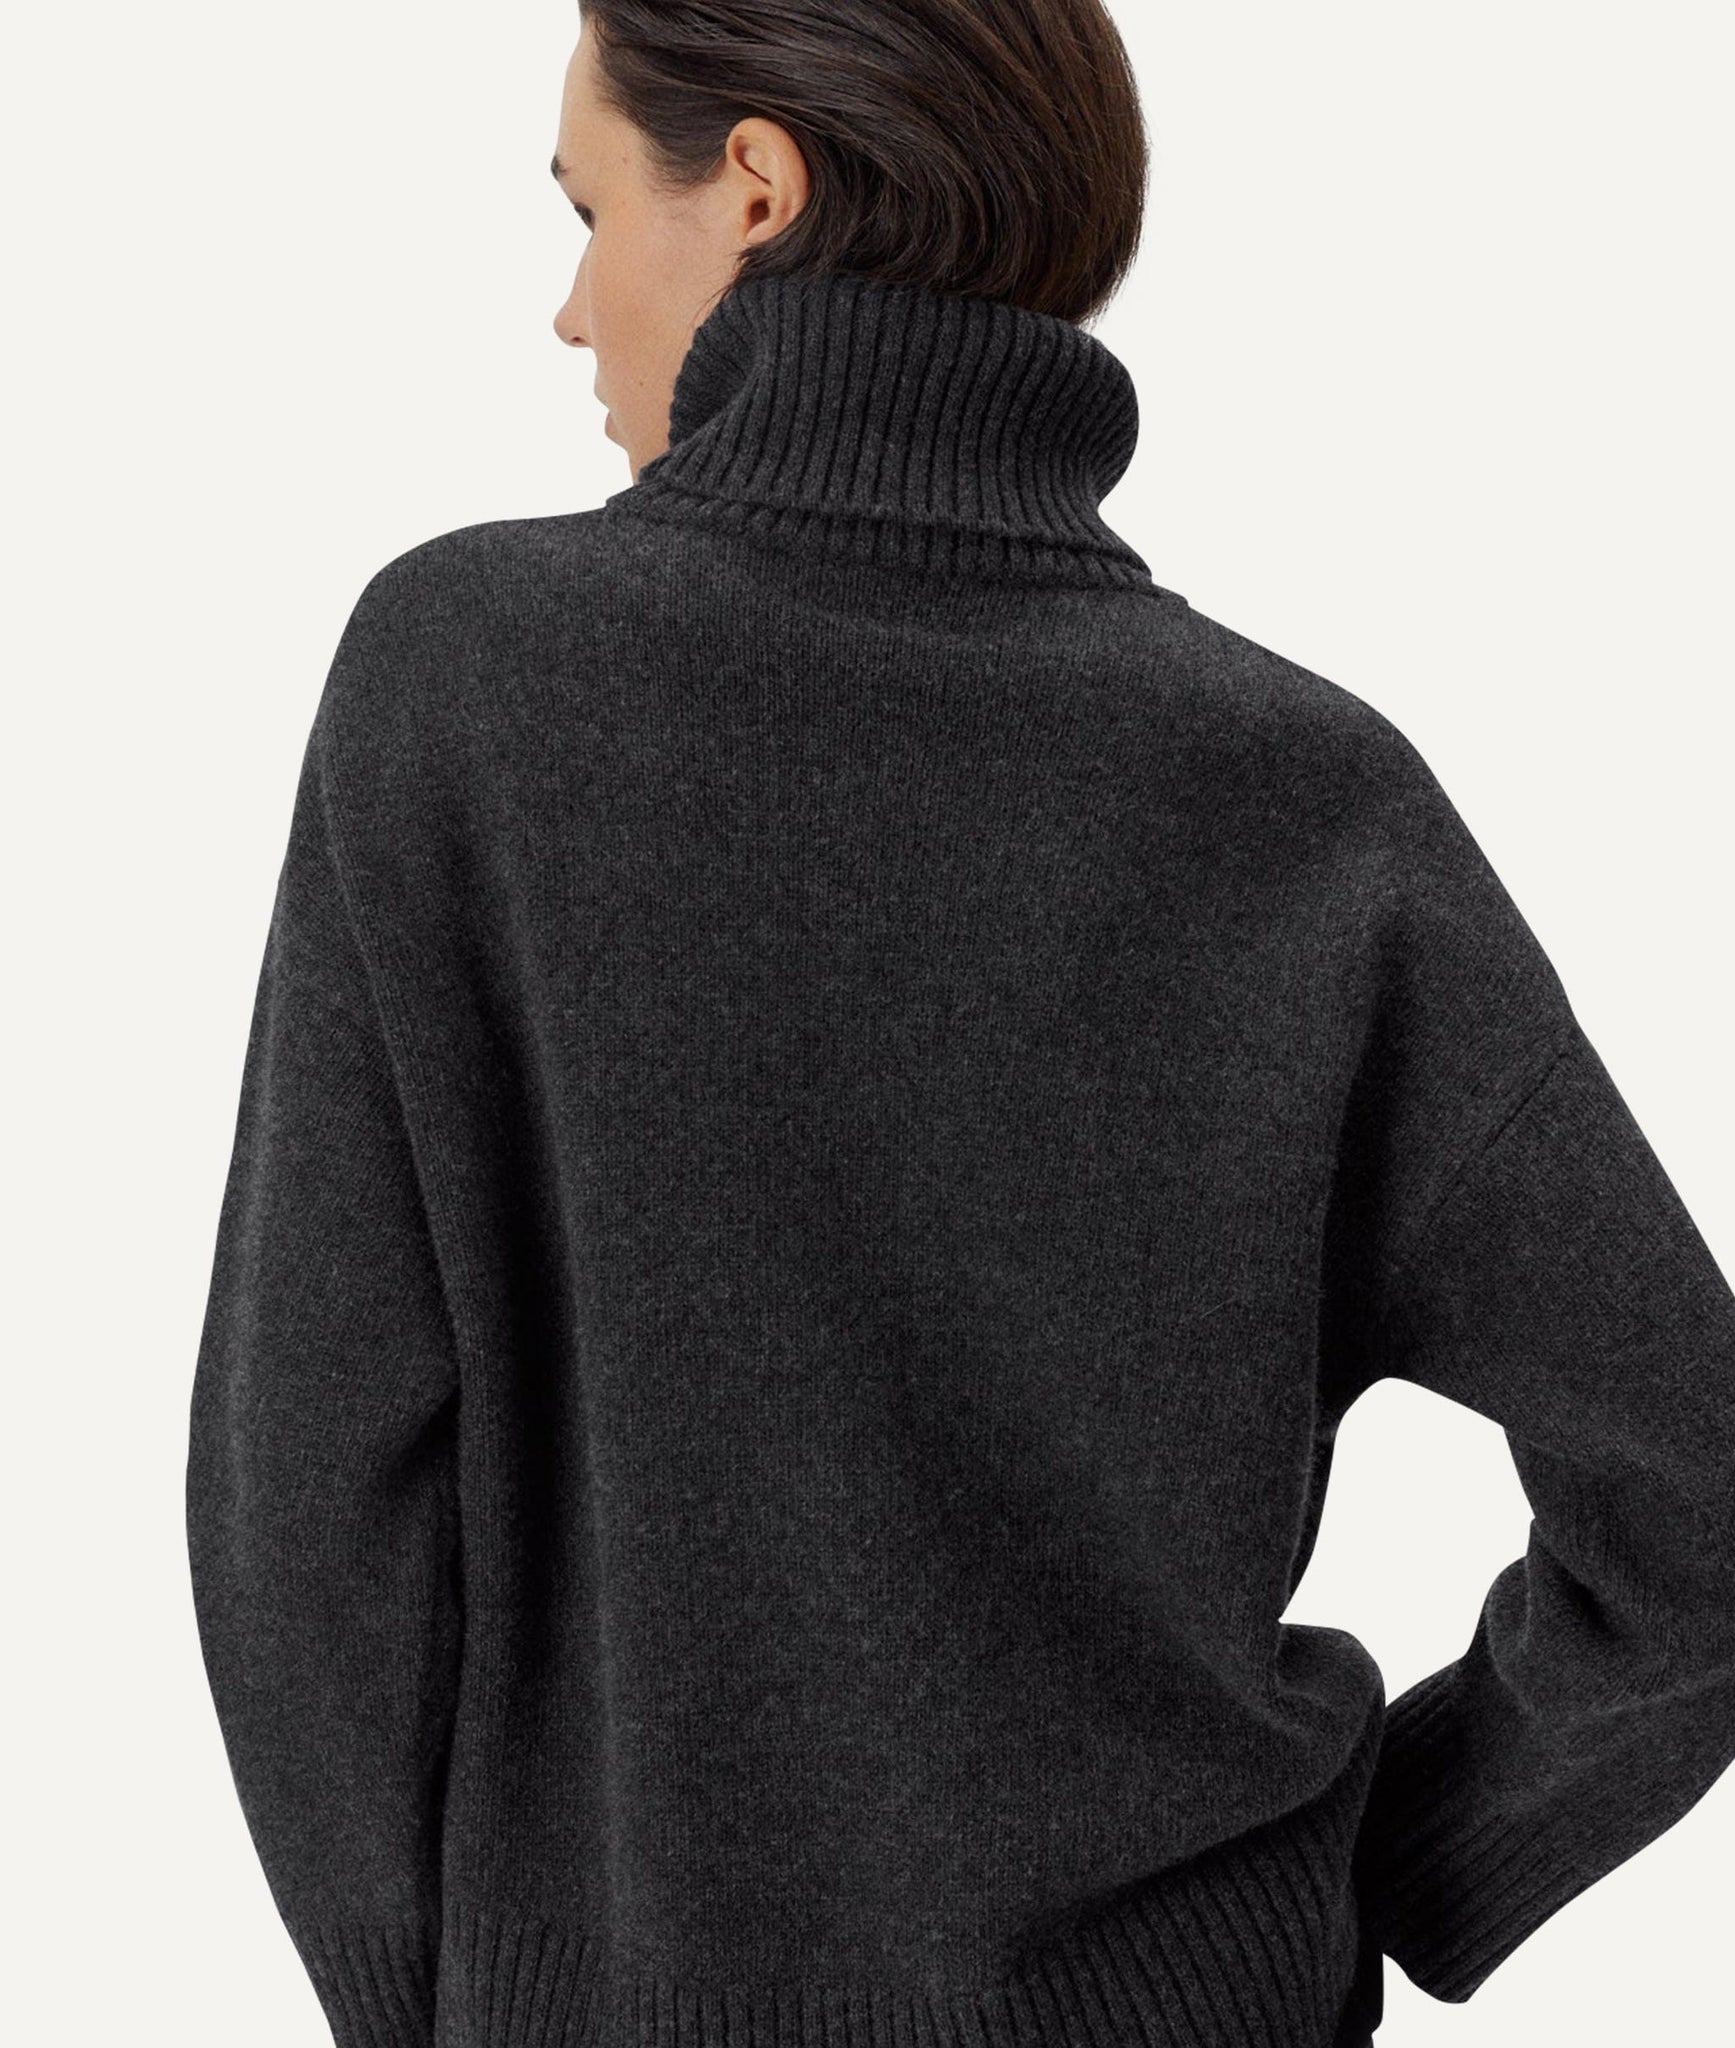 The Woolen Chunky Roll-Neck